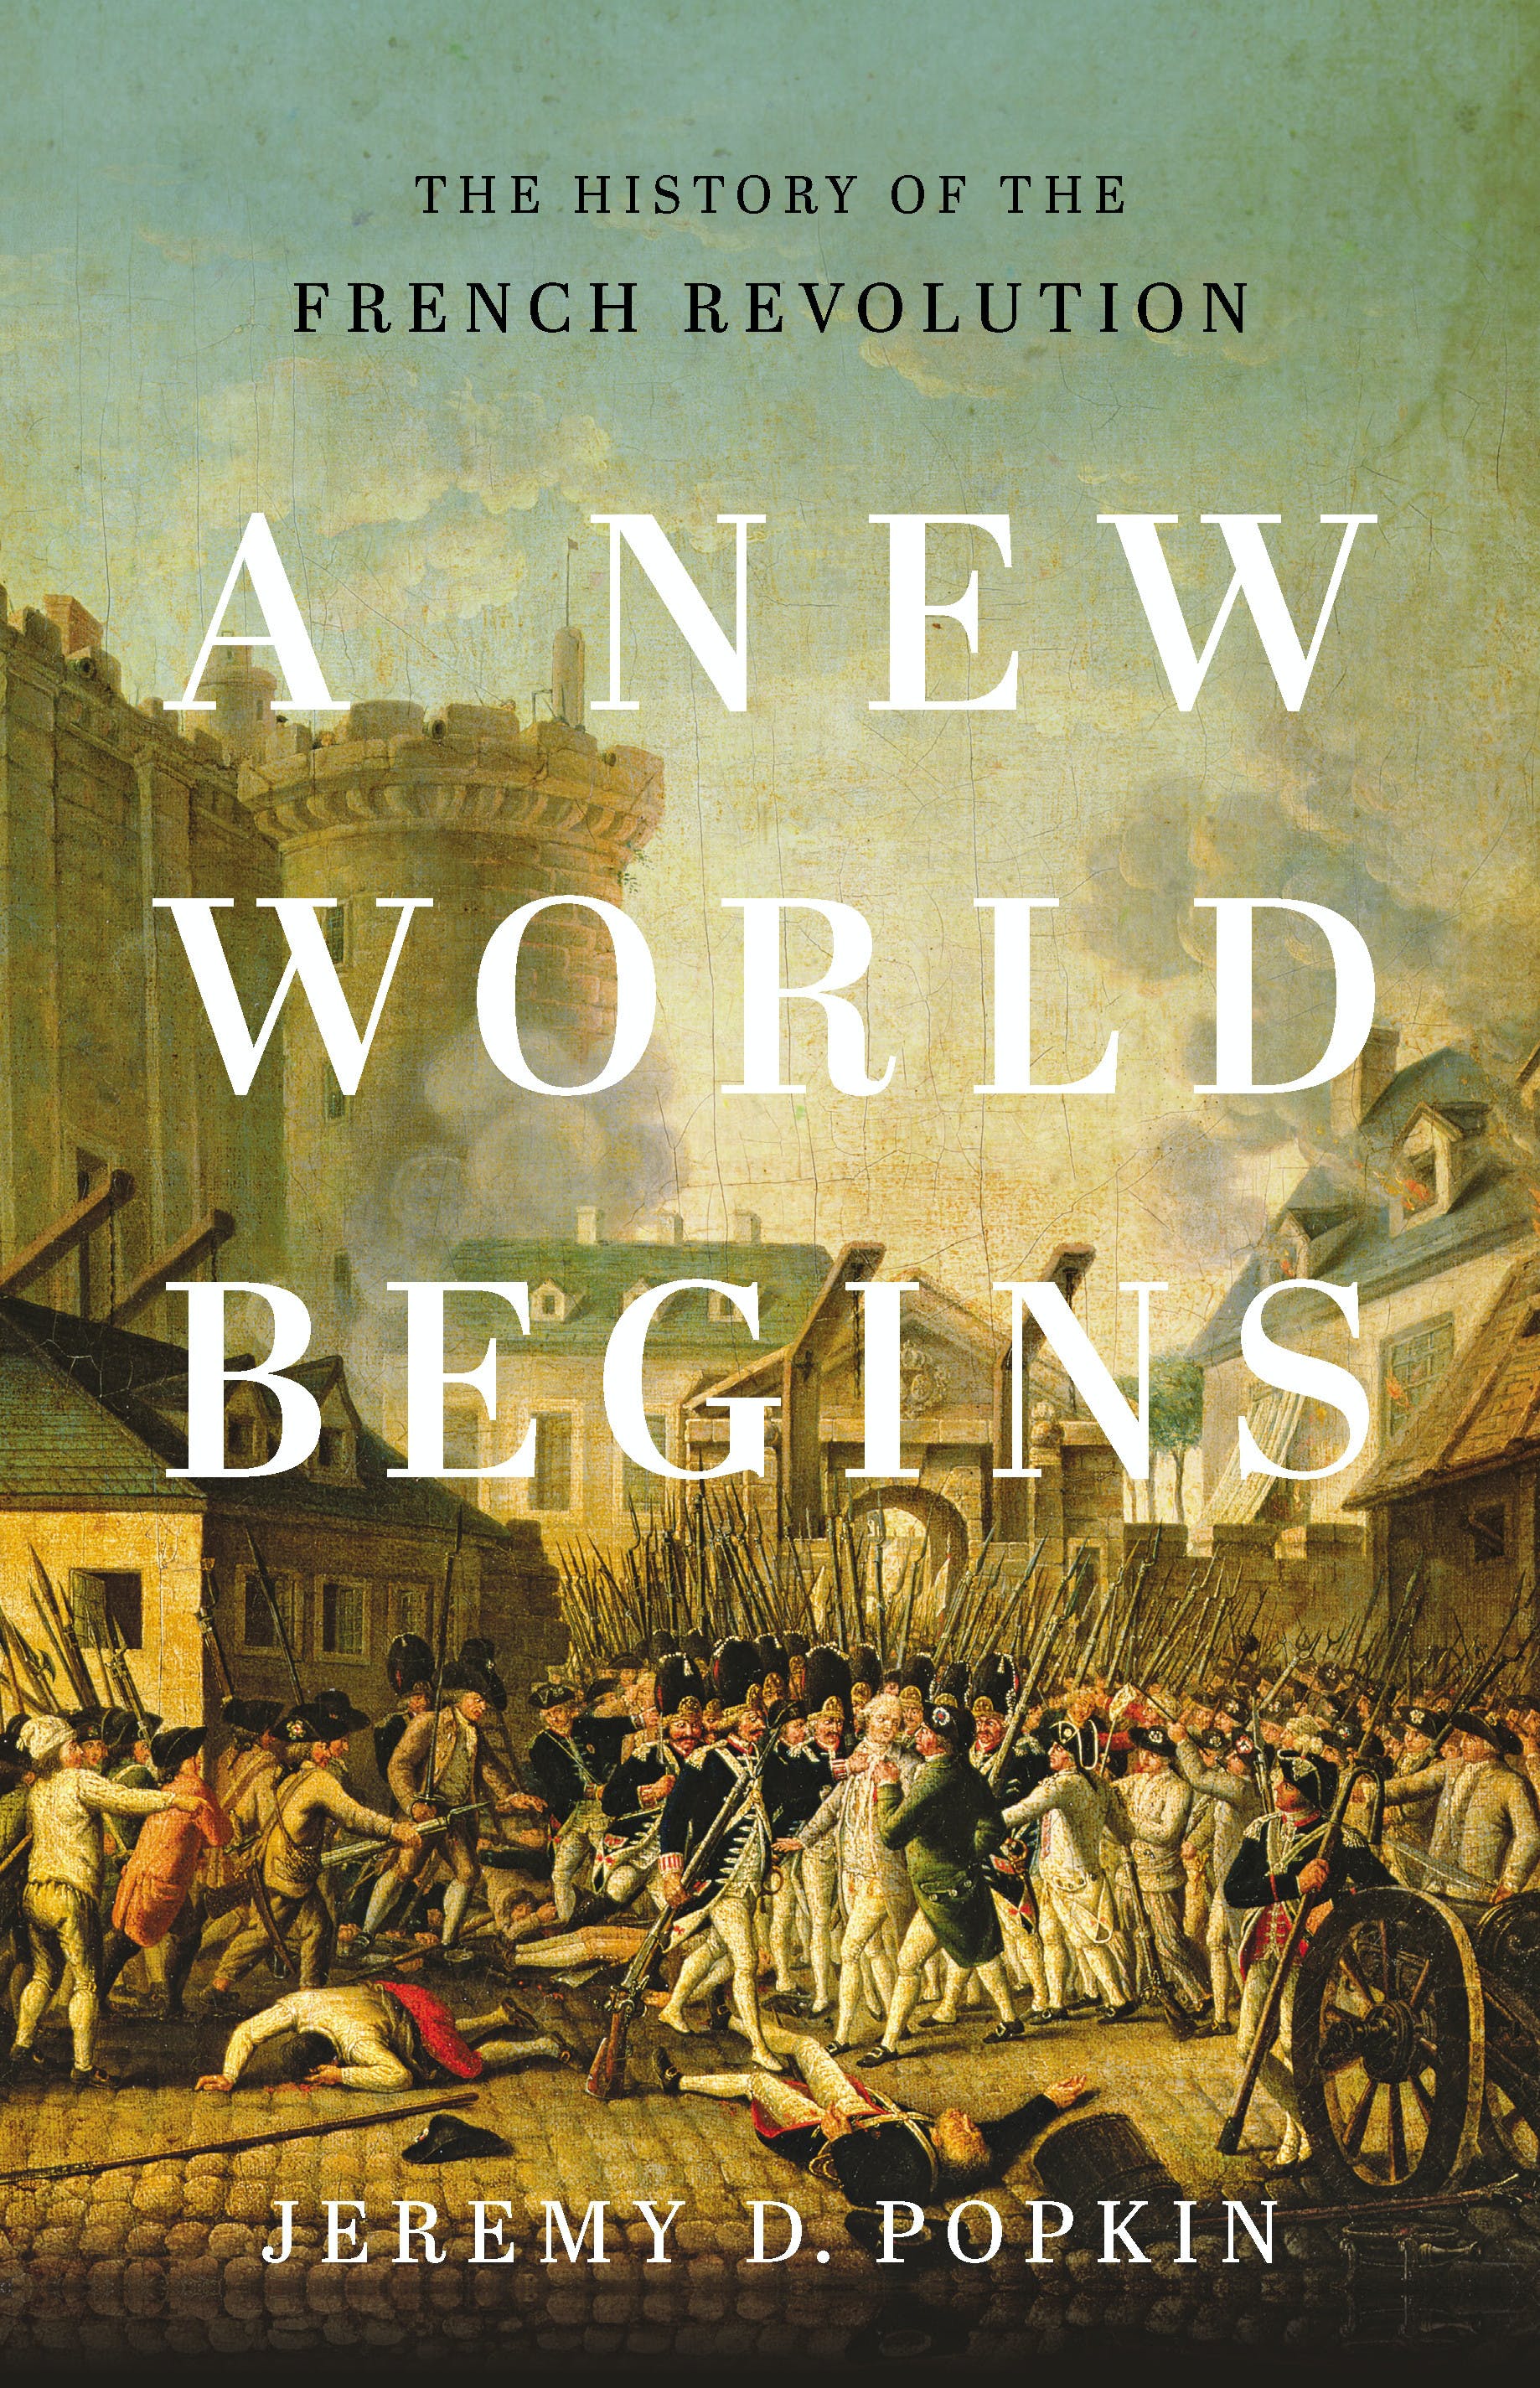 "A New World Begins" and the meaning of the French Revolution